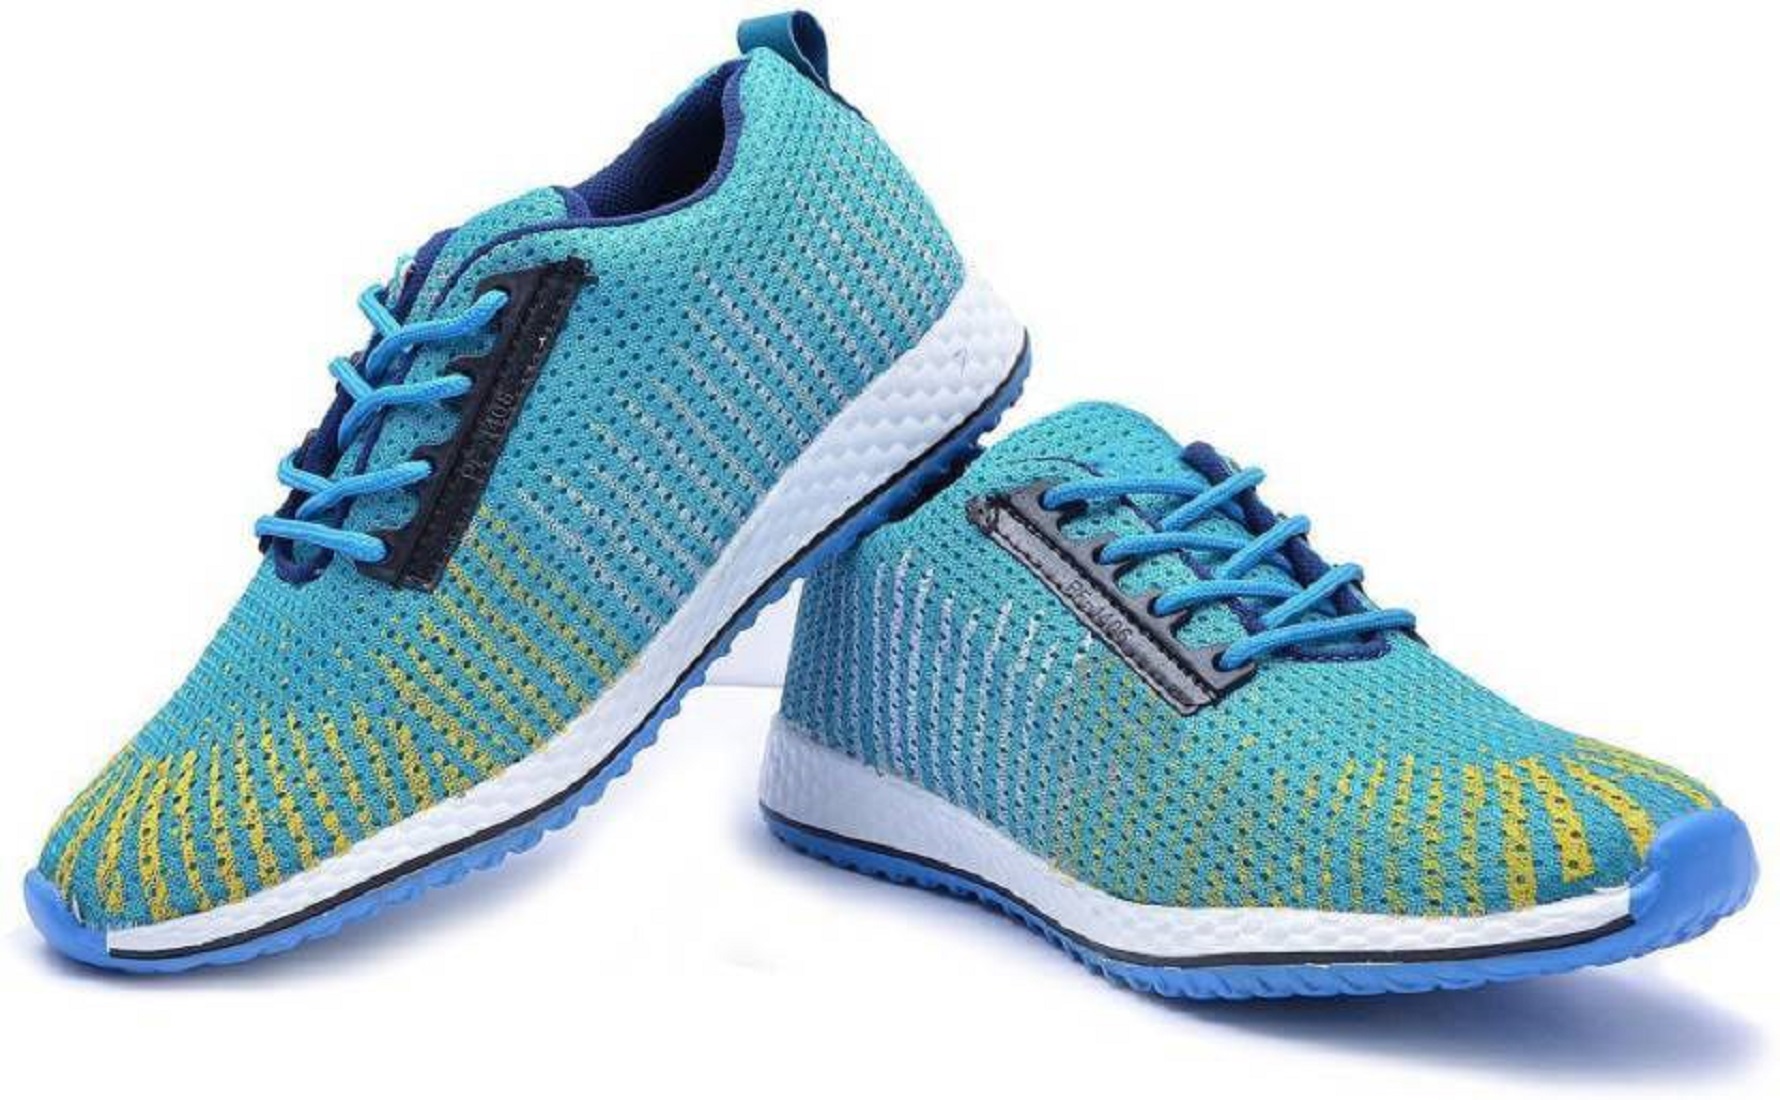 Buy Layasa Men's Blue Running Shoes Online @ ₹499 from ShopClues